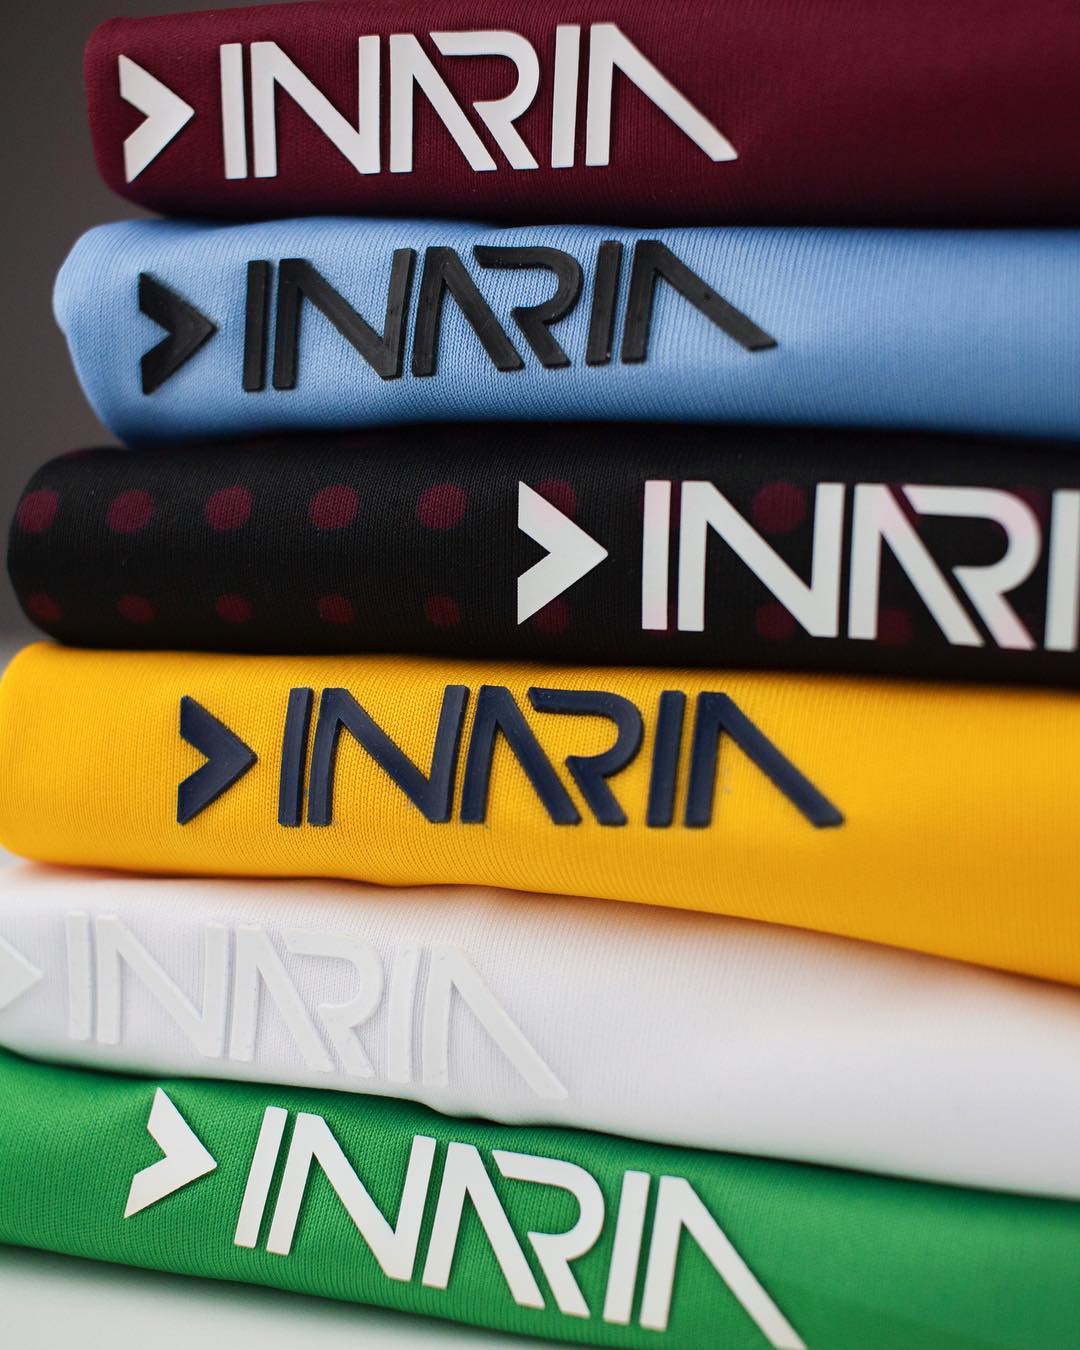 Pop up sale this Friday on all discontinued outerwear and tracksuits. Email us info@inariasoccer.com for a sneak peak or swing by Friday 2-9PM, Saturday 11-5. In shop only. #inariasoccer #sale #holidaysale